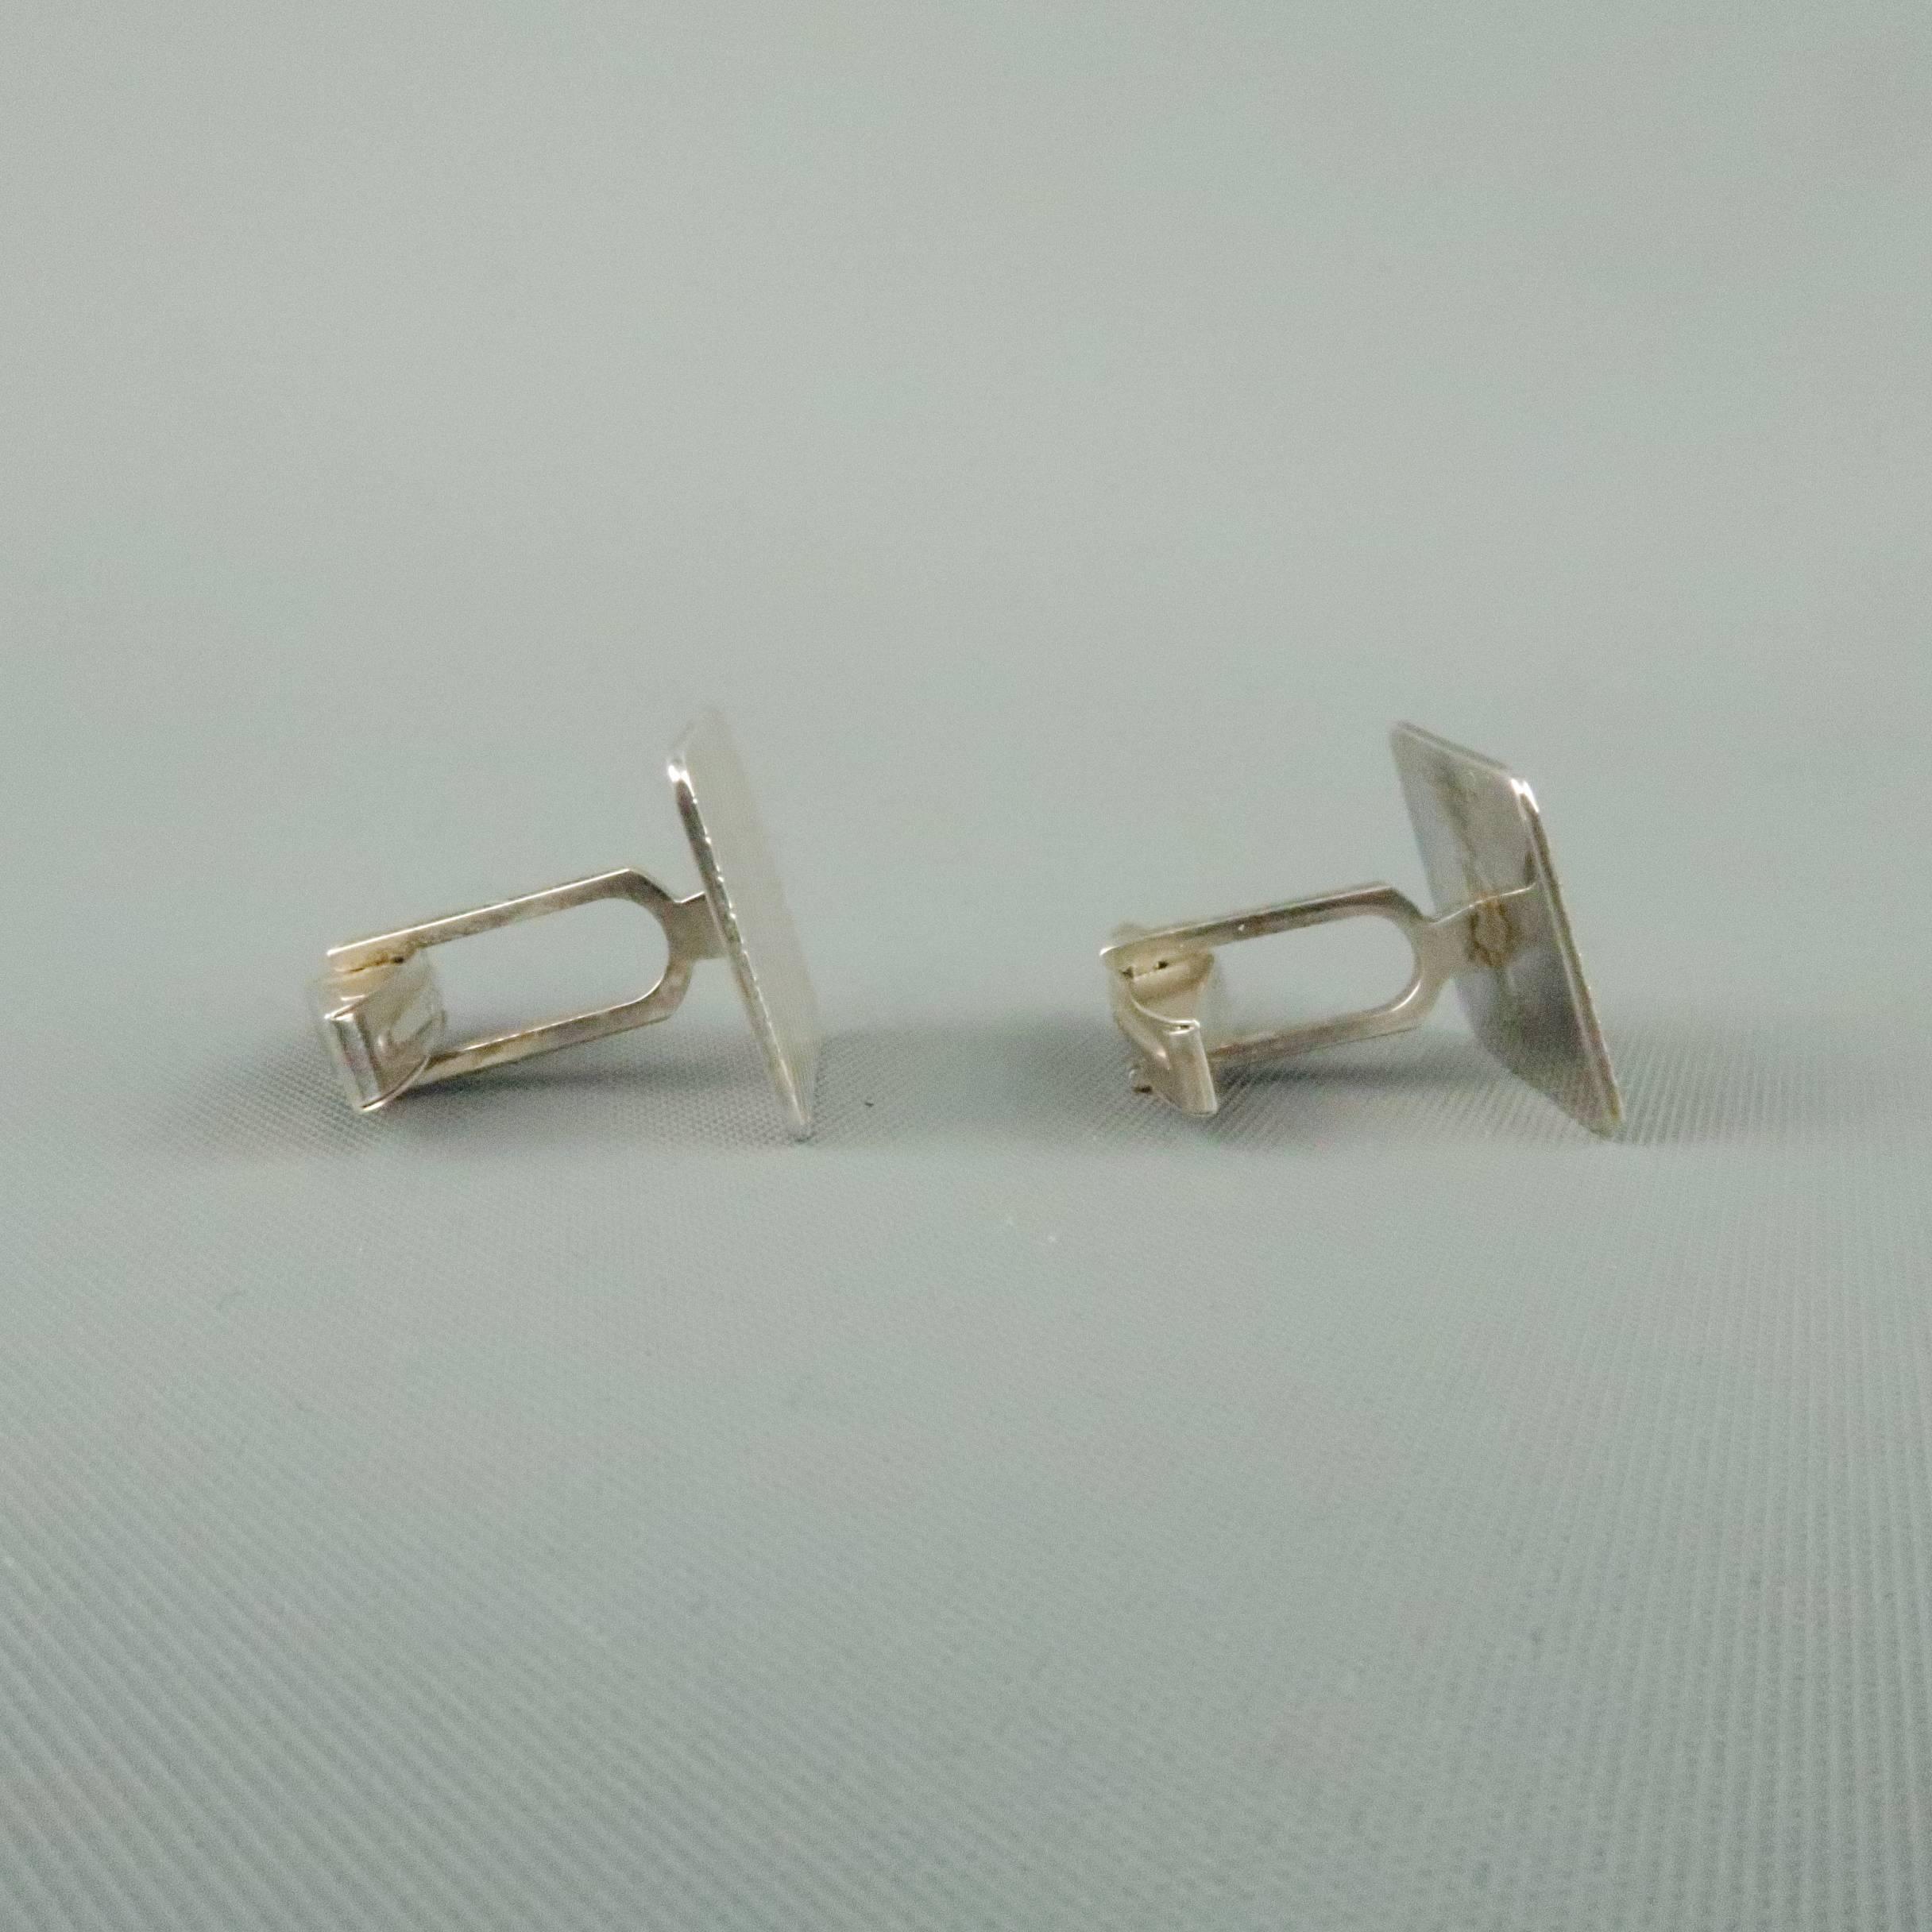 Vintage Paul Stuart cuff links come in sterling silver with a stripe embossed square motif. With case.
 
Good Pre-Owned Condition.
